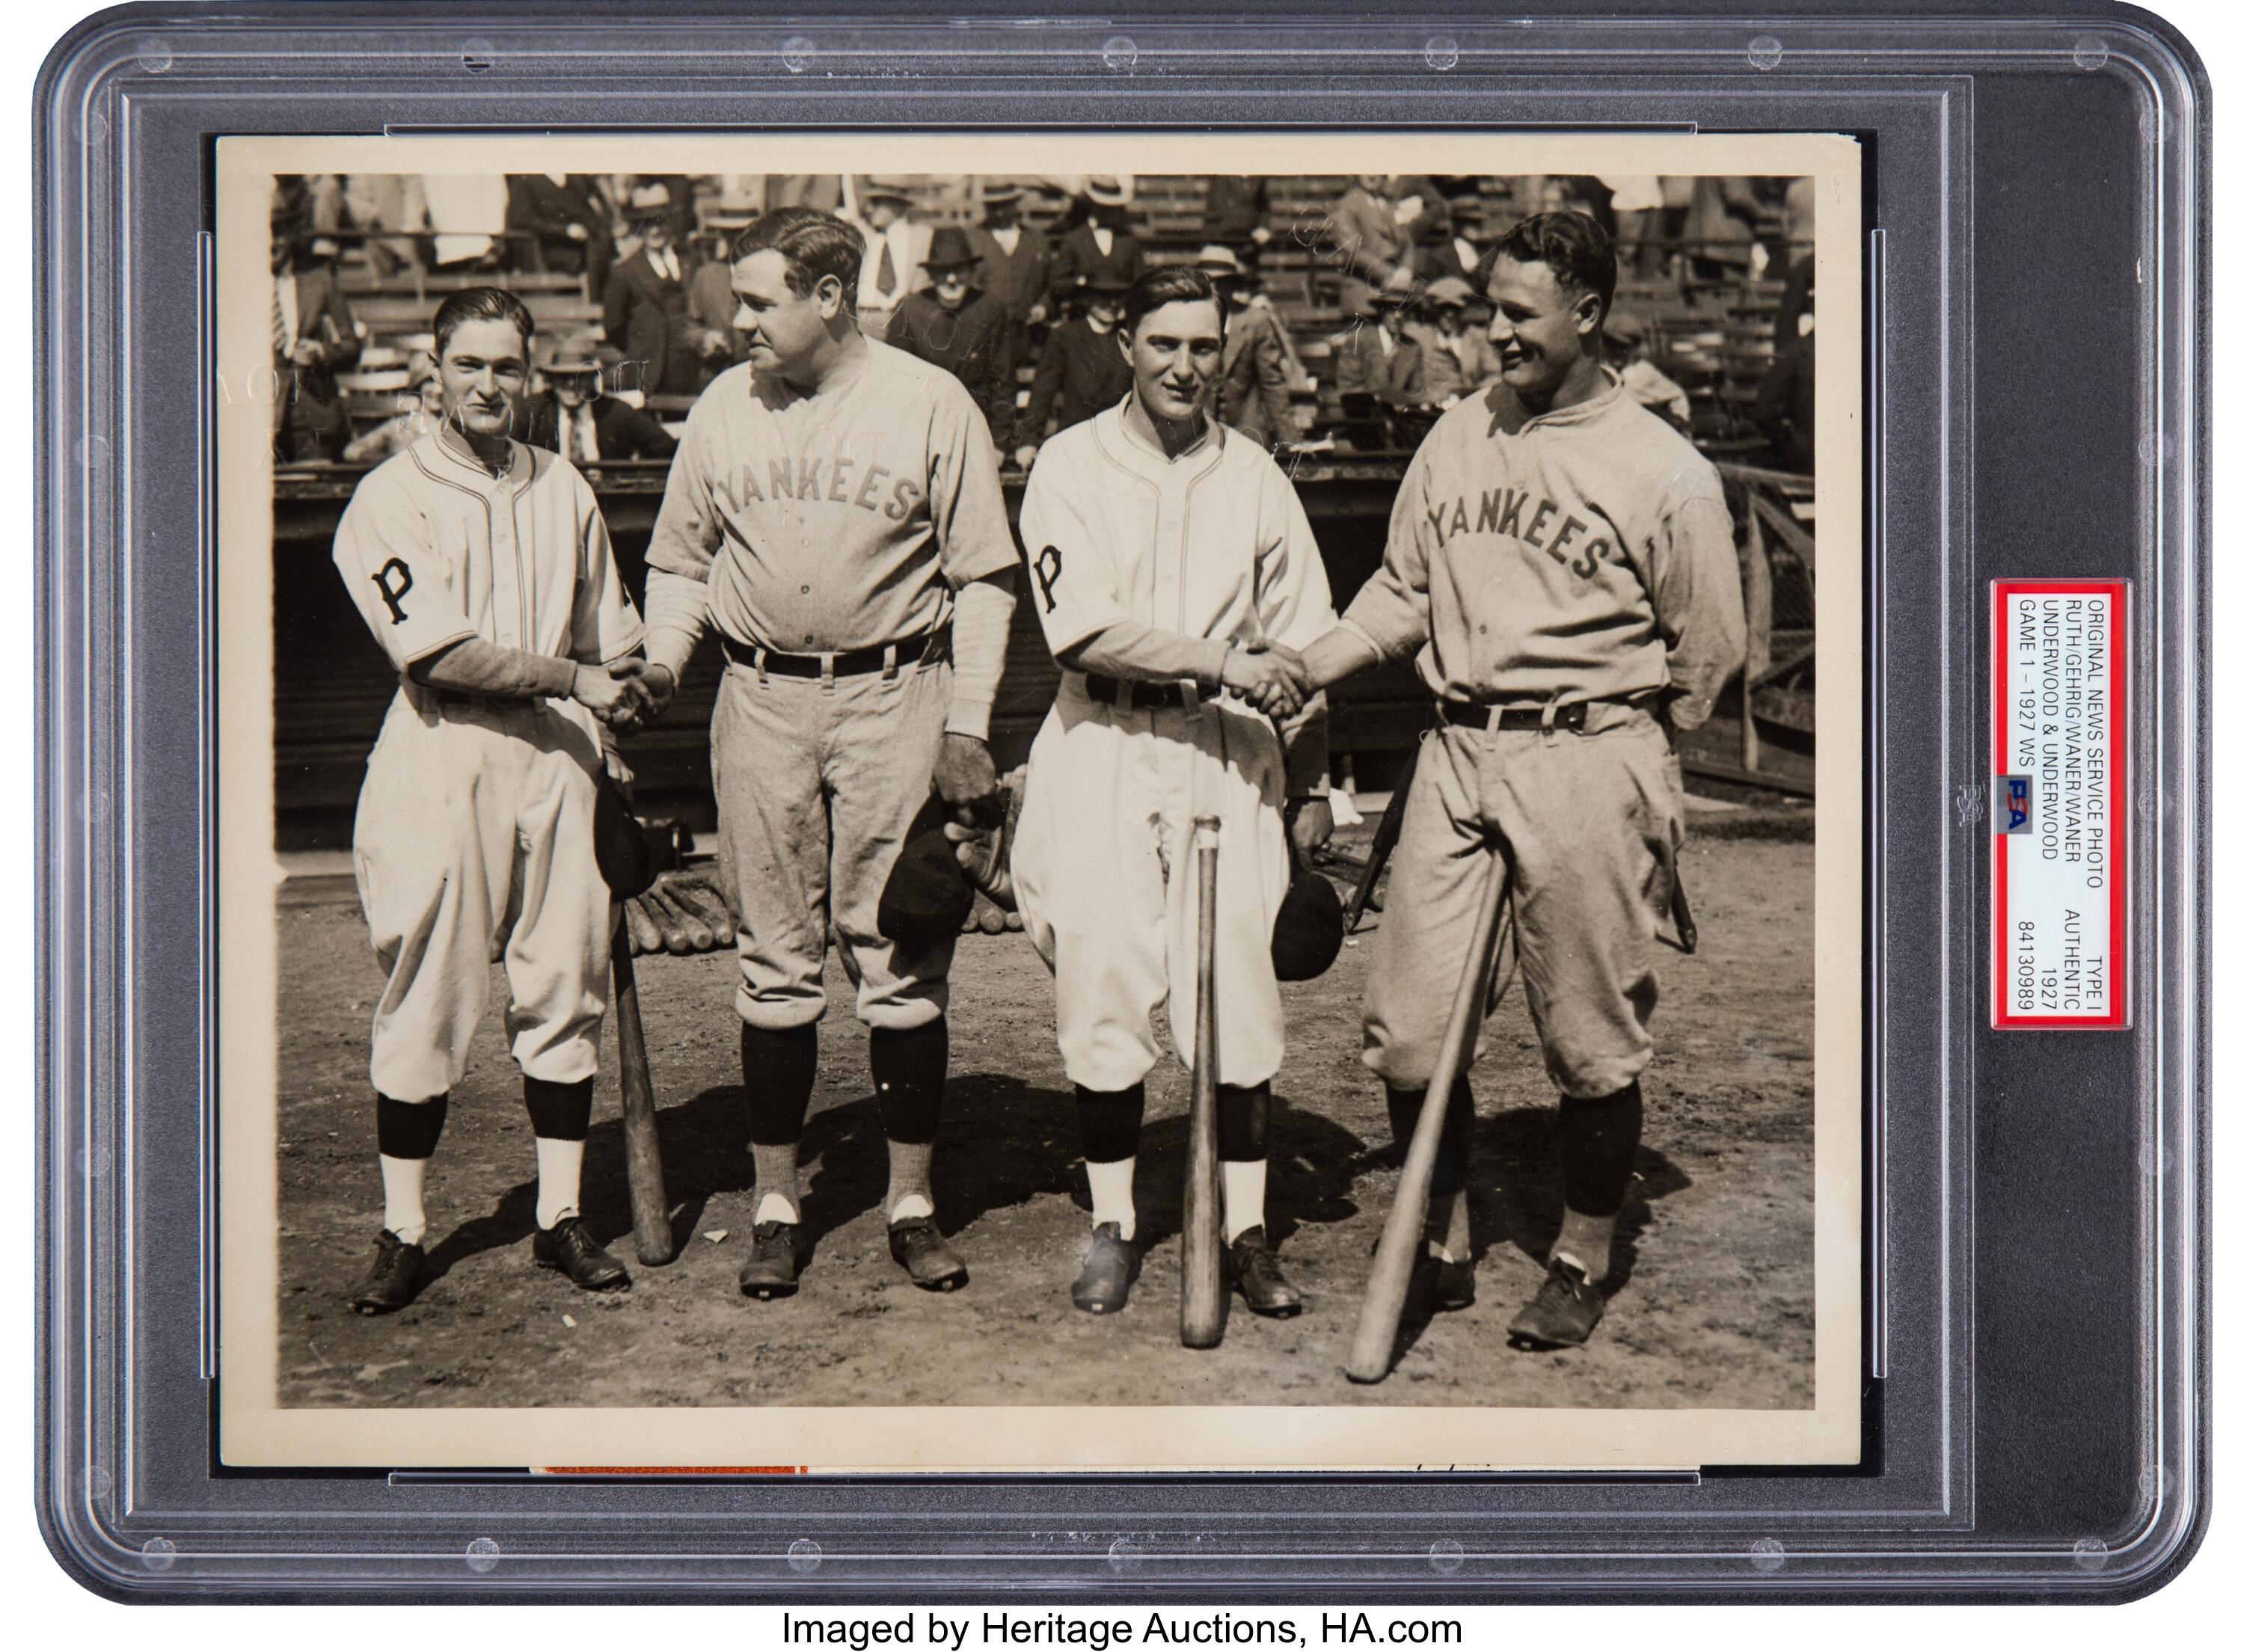 Memory Lane Hosting Pair of Iconic Jerseys at NAtional Convention: Ruth and  Gehrig - Sports Collectors Digest